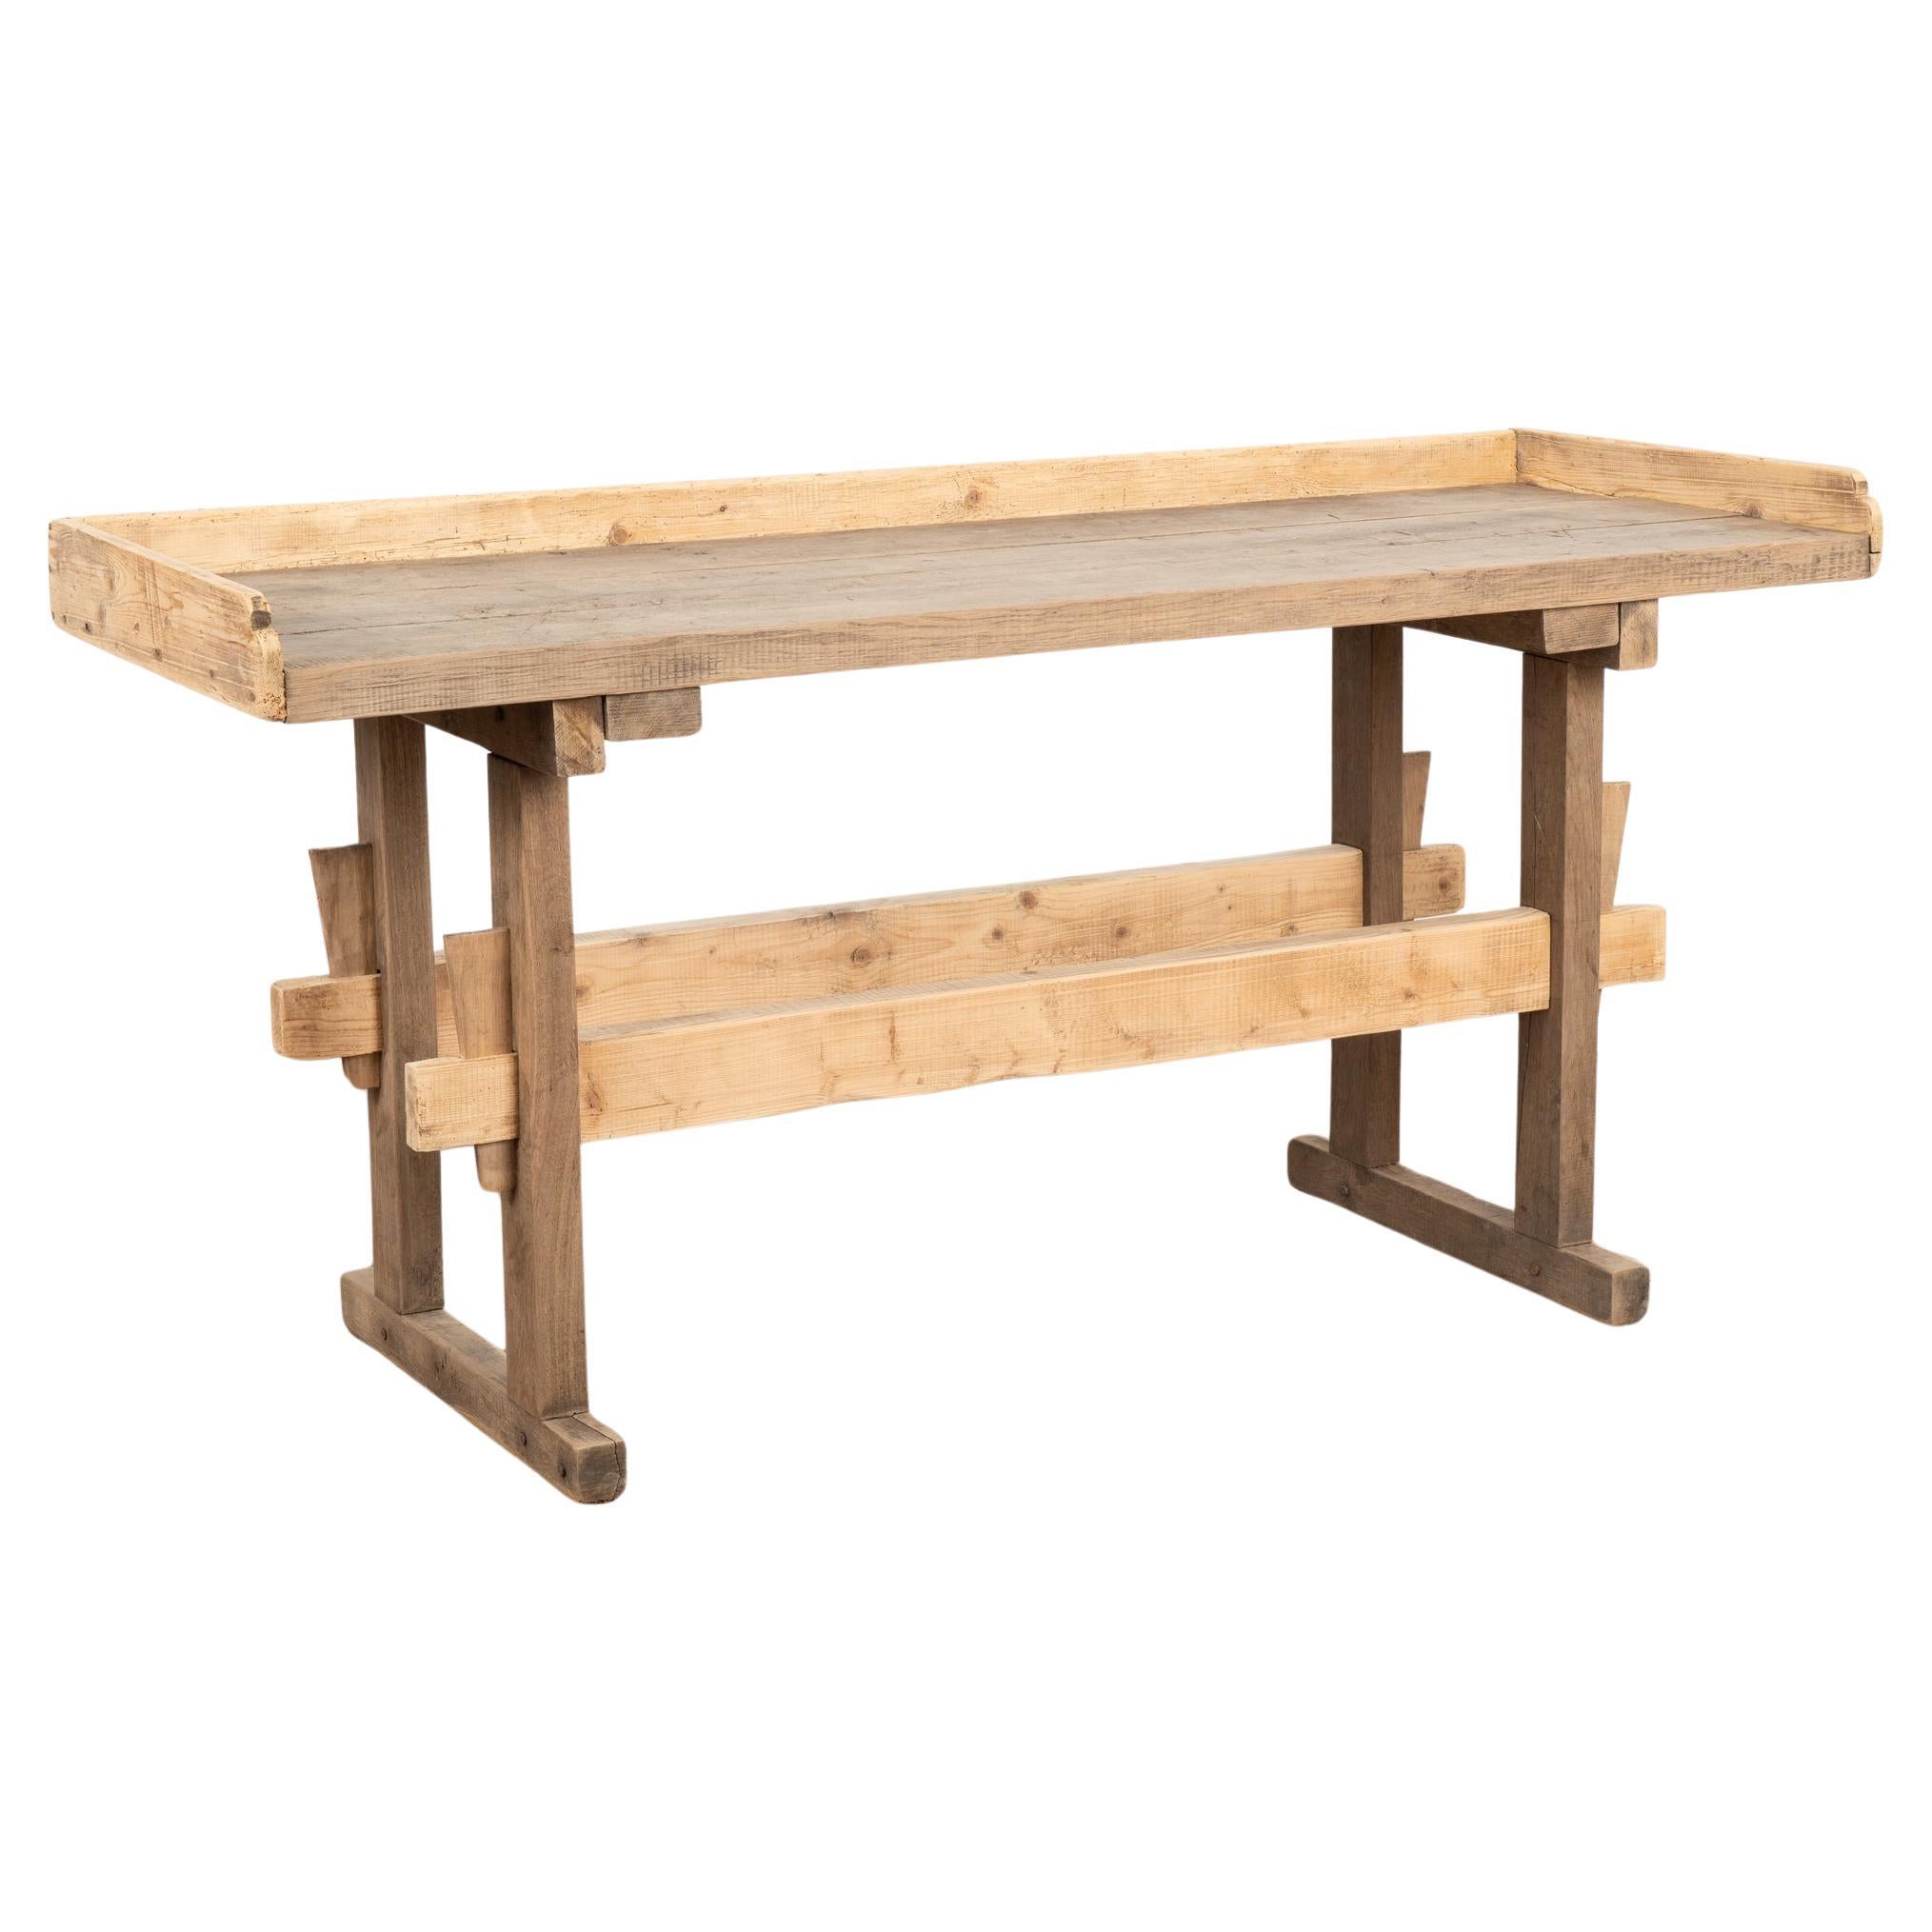 Rustic Work Table Console Table, circa 1880 from Hungary